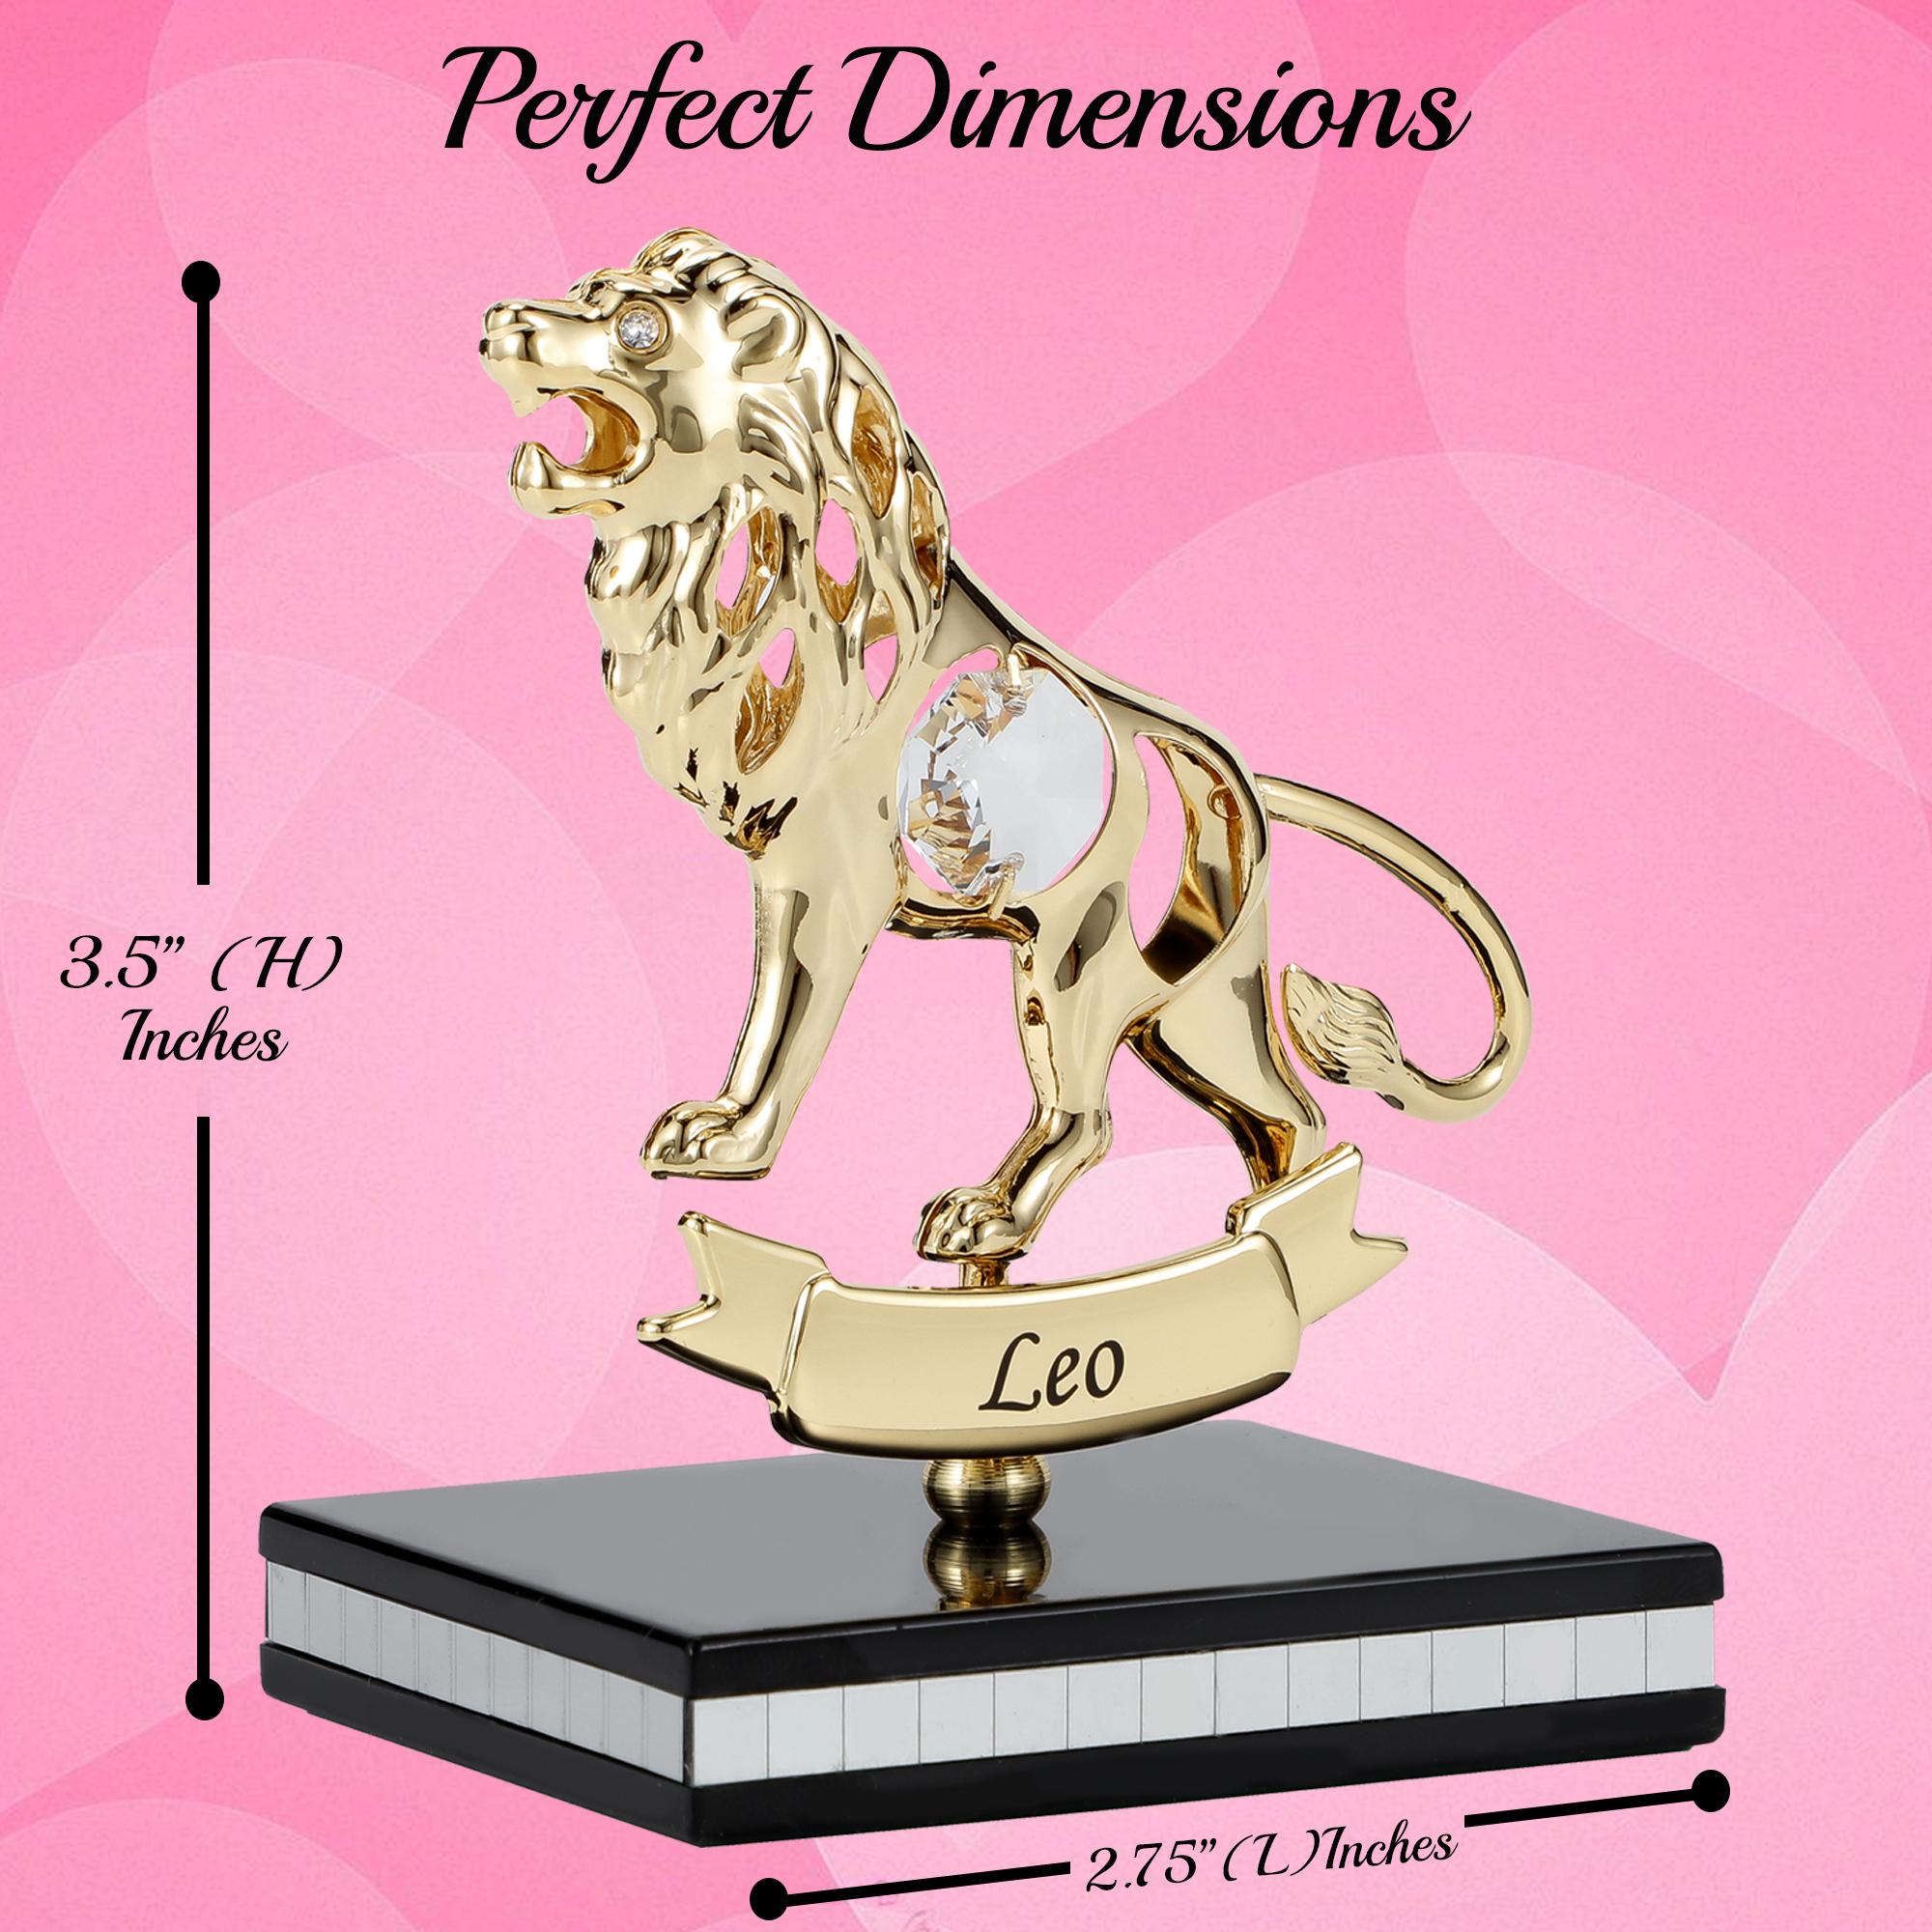 Matashi 24K Gold Plated Zodiac Astrological Sign Leo Figurine Statuette On Stand Studded With Crystals Gift For Mom Girlfriend Wife Dad